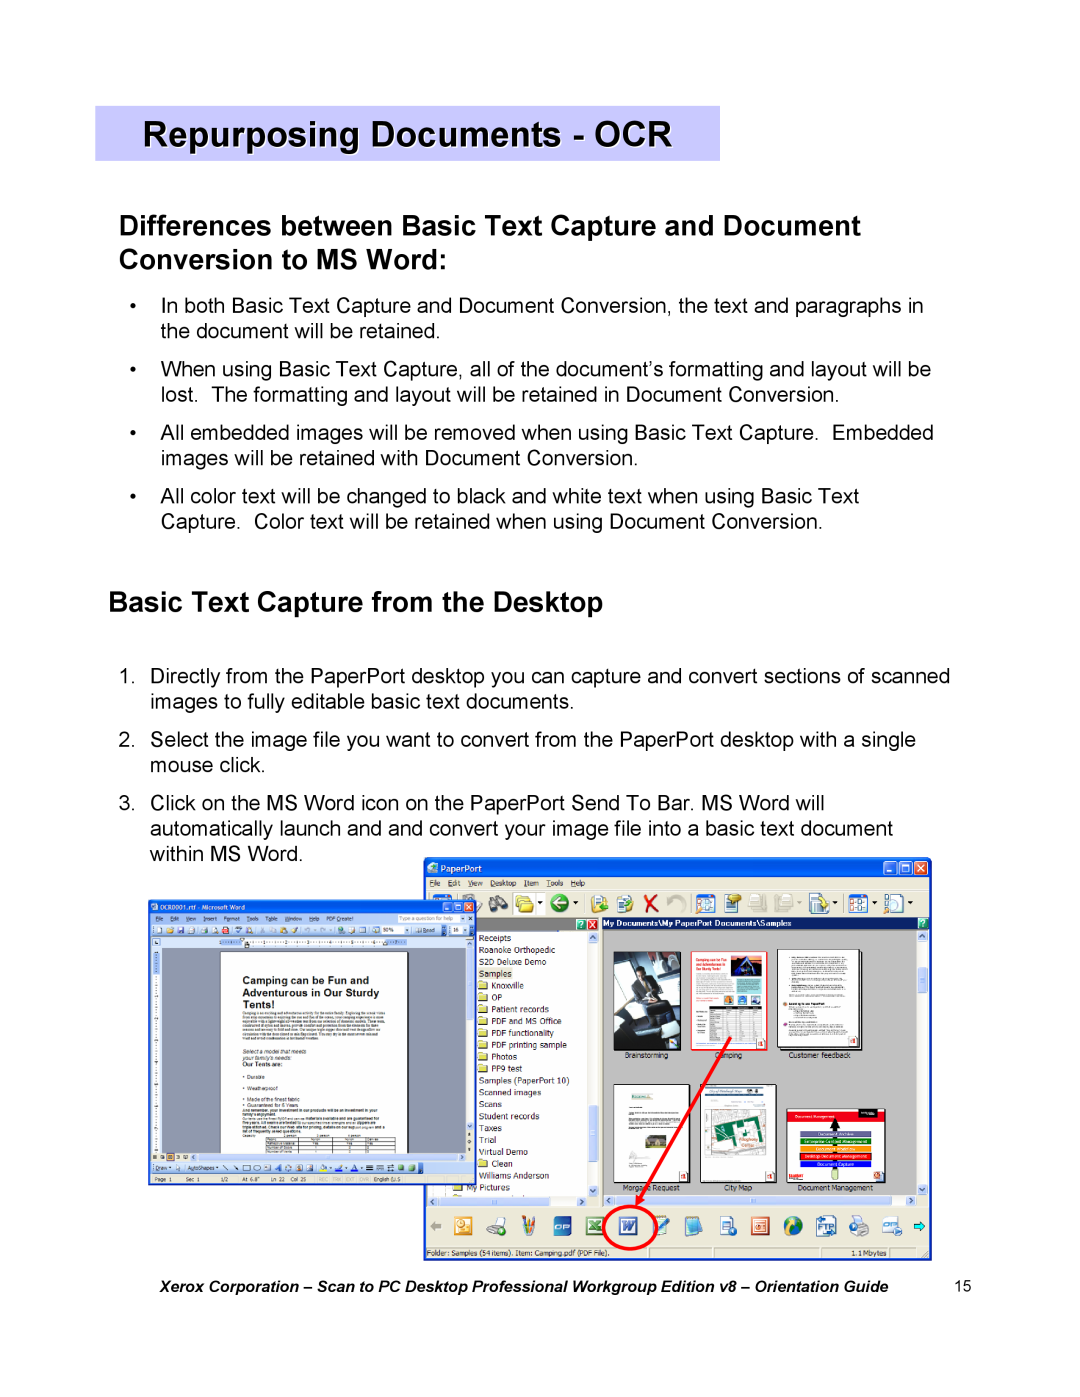 Xerox G8144Z manual Repurposing Documents - OCR, Basic Text Capture from the Desktop 